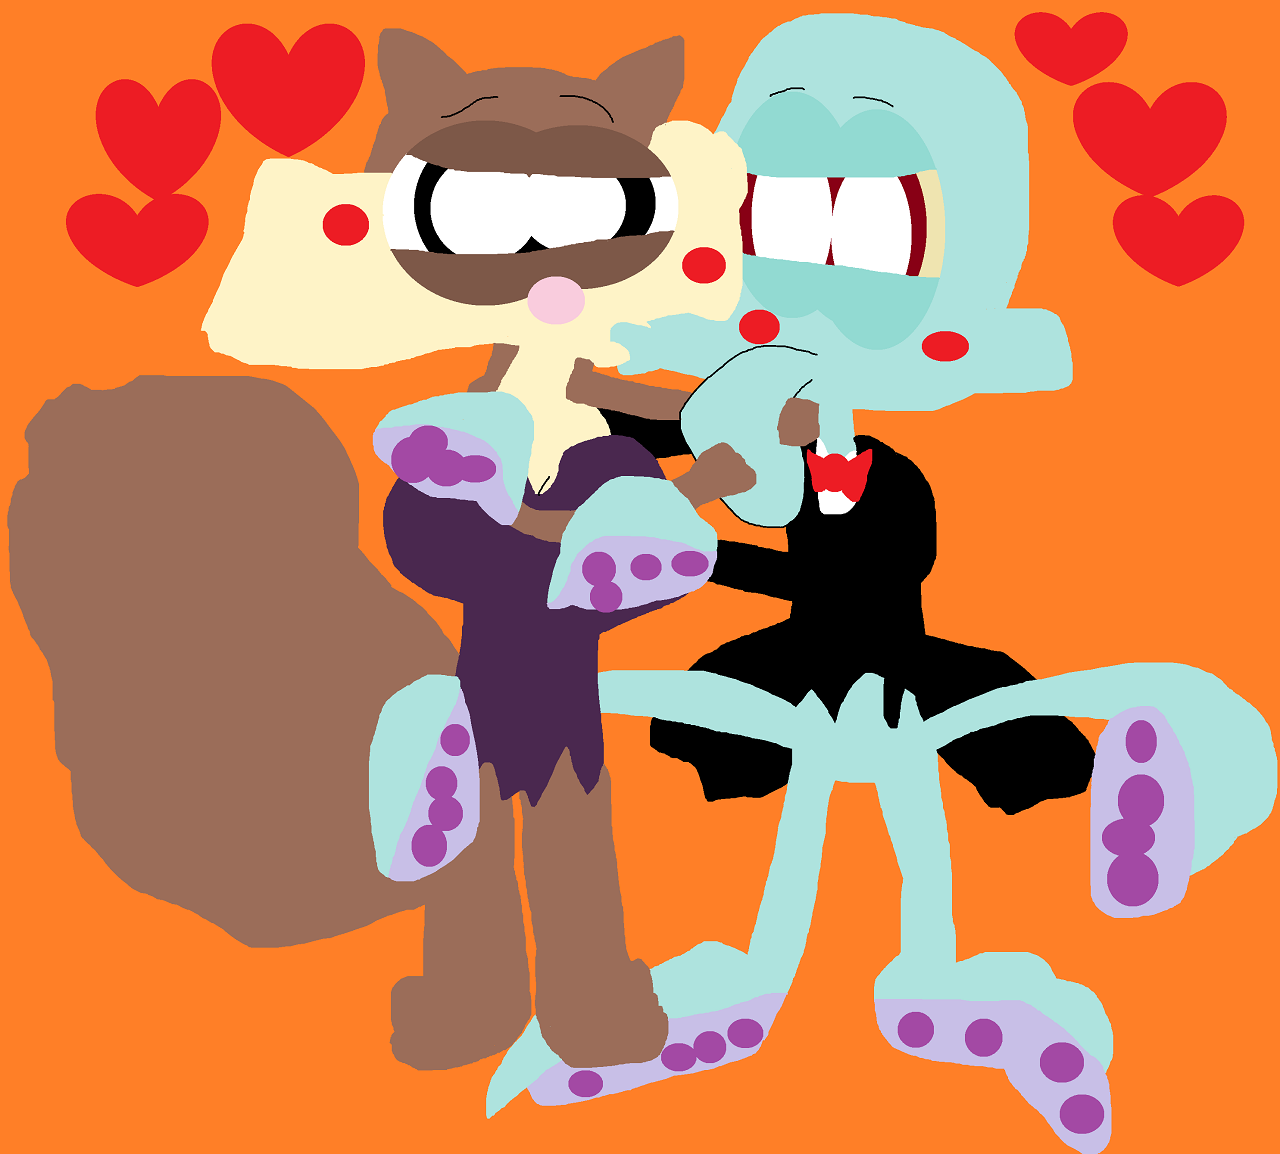 Squidward And Sandy Kissing On A Fancy Date Again by Falconlobo